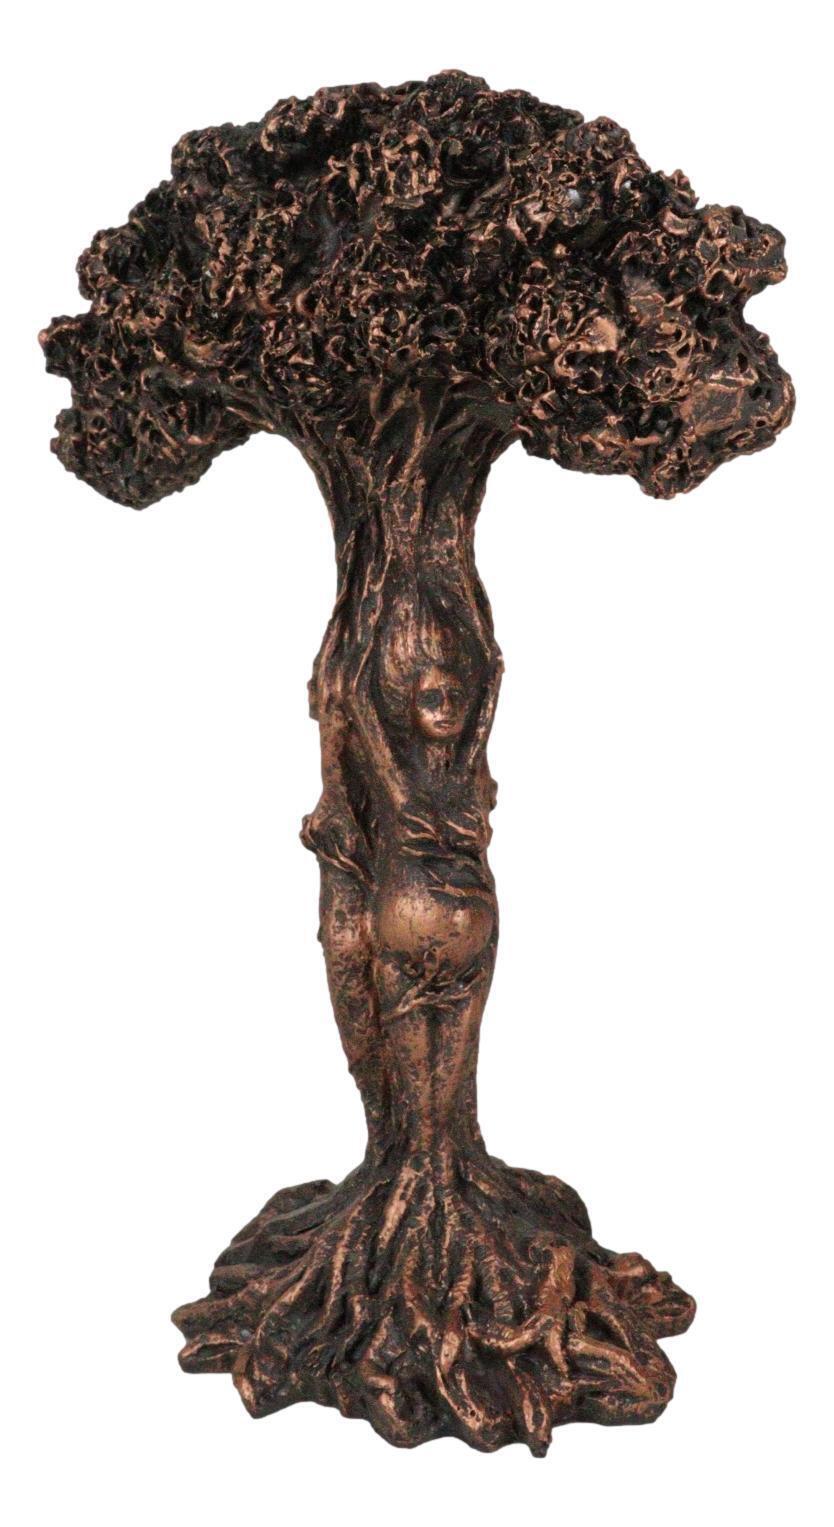 Celtic Tree Gaia Dryad Ent Triple Goddess Moon Maiden Mother And Crone Figurine